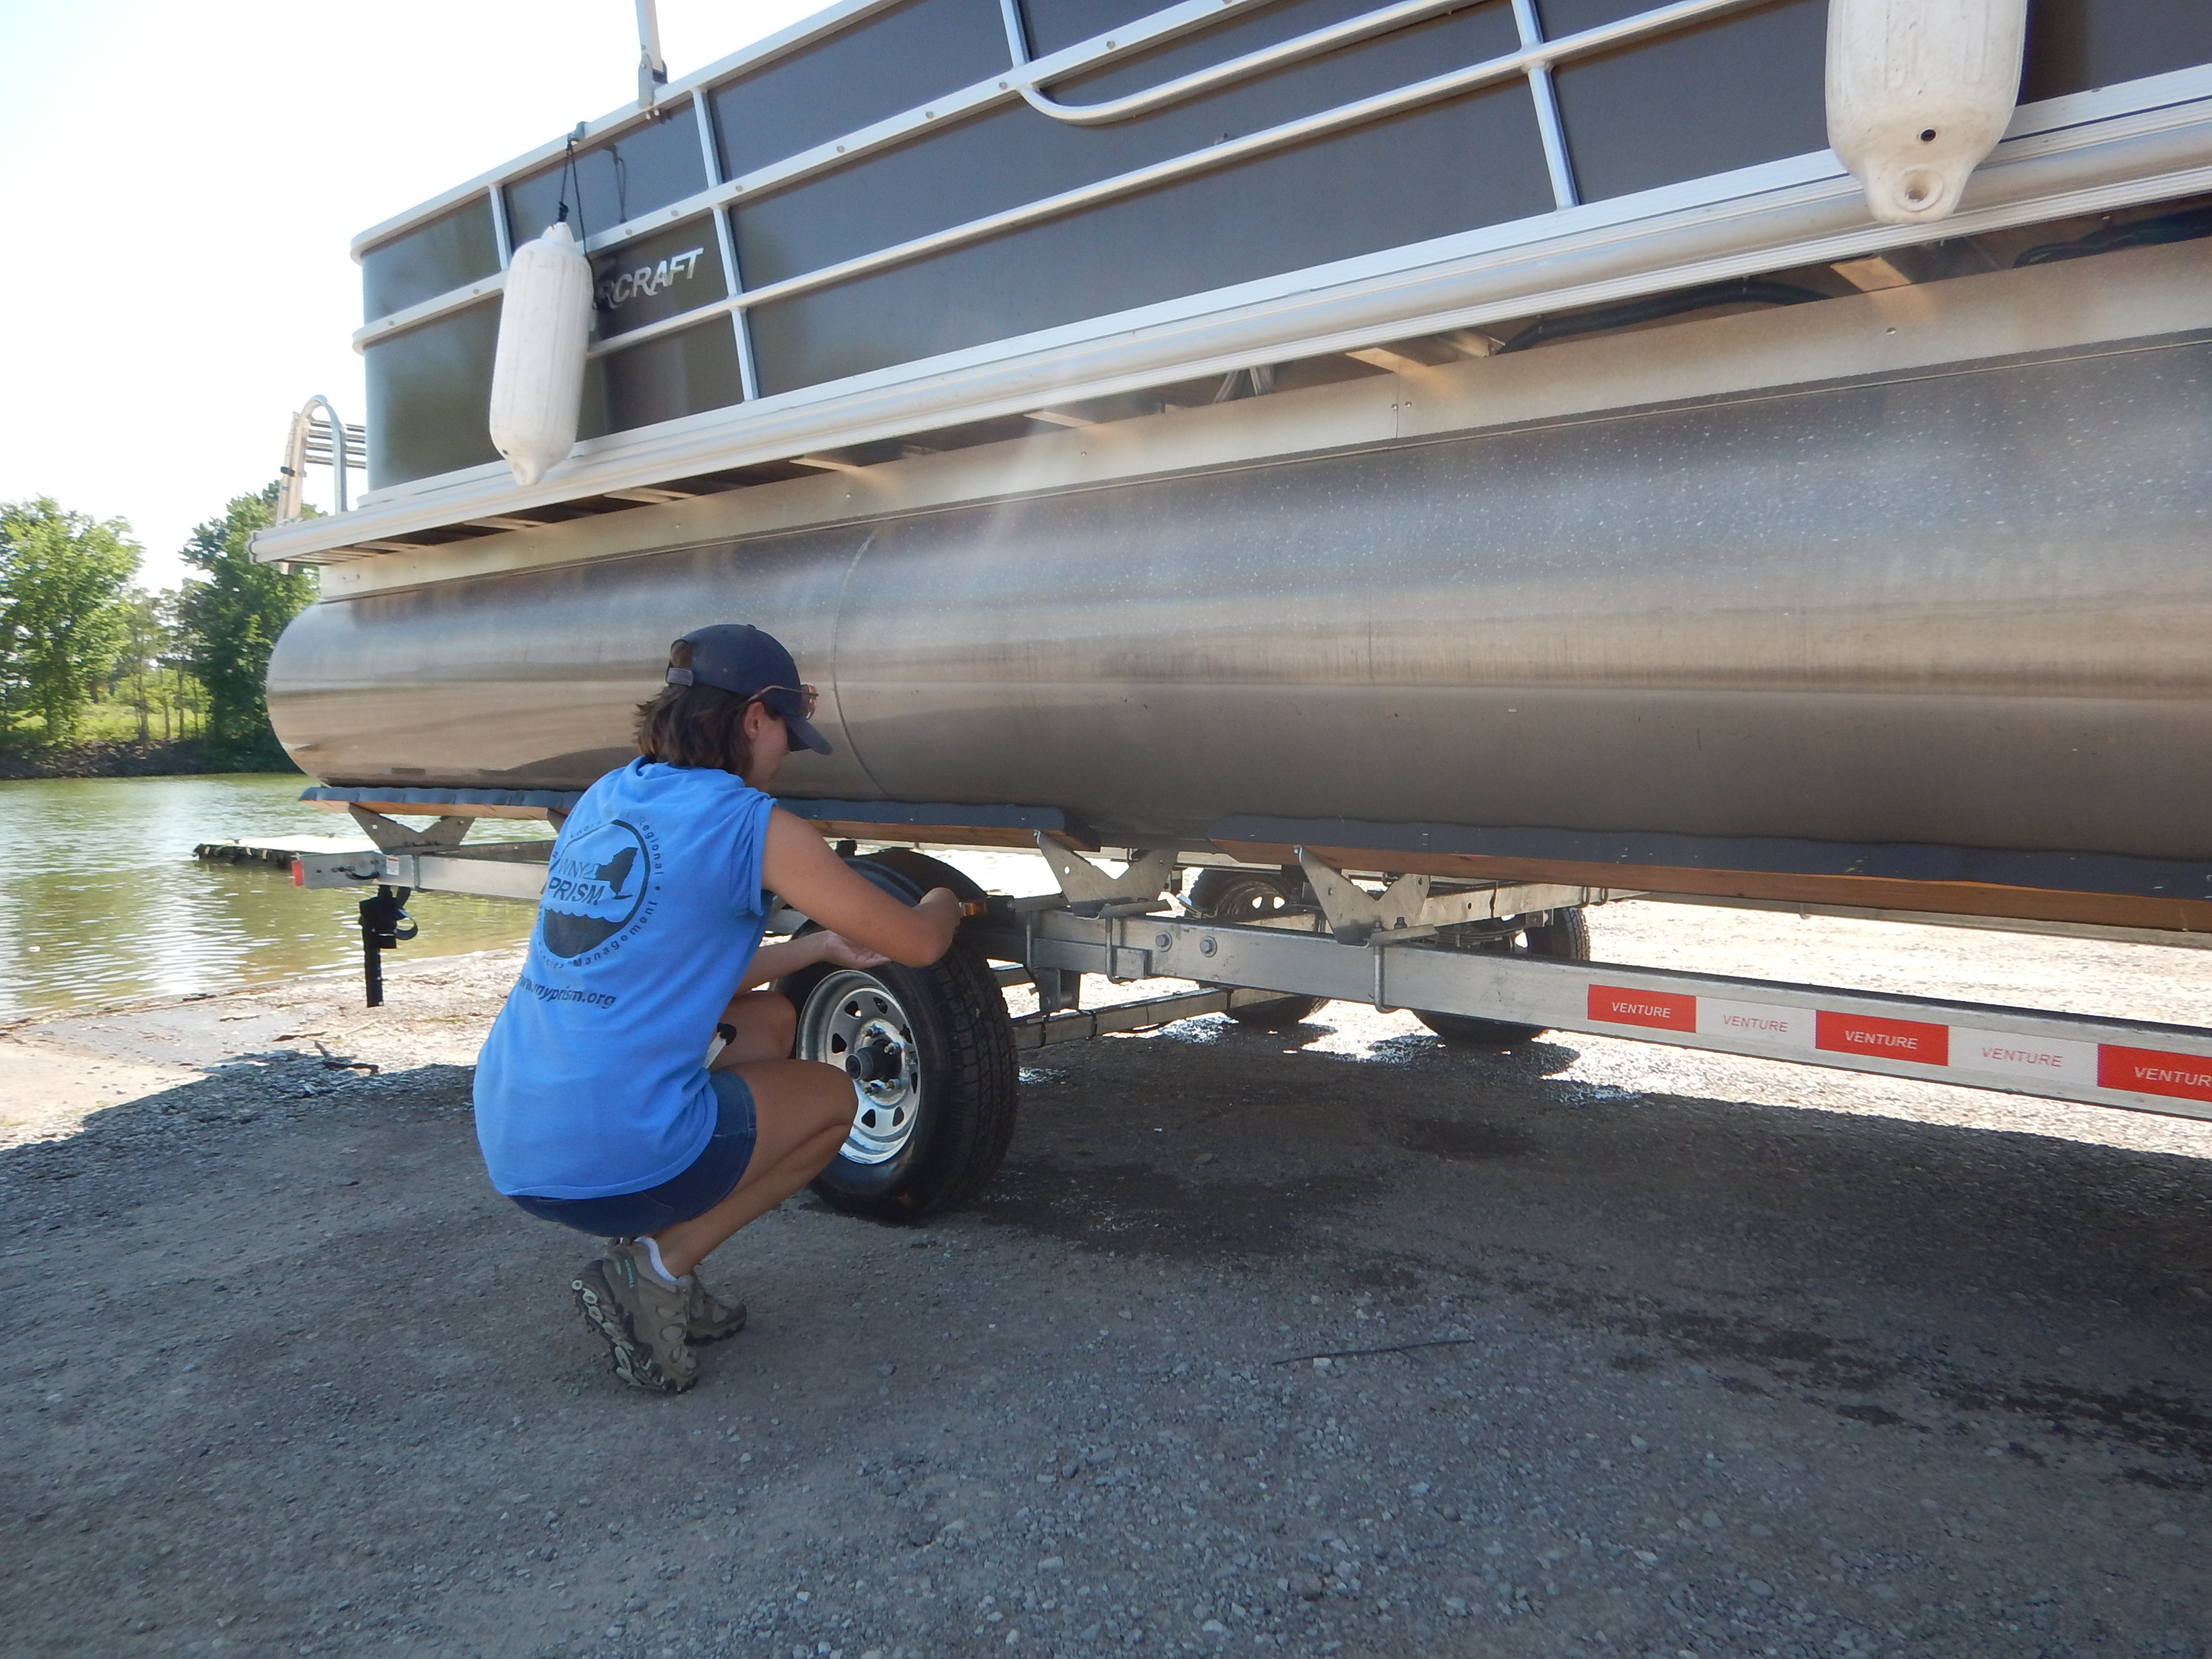 a person crouches by a boat on a trailer to inspect it